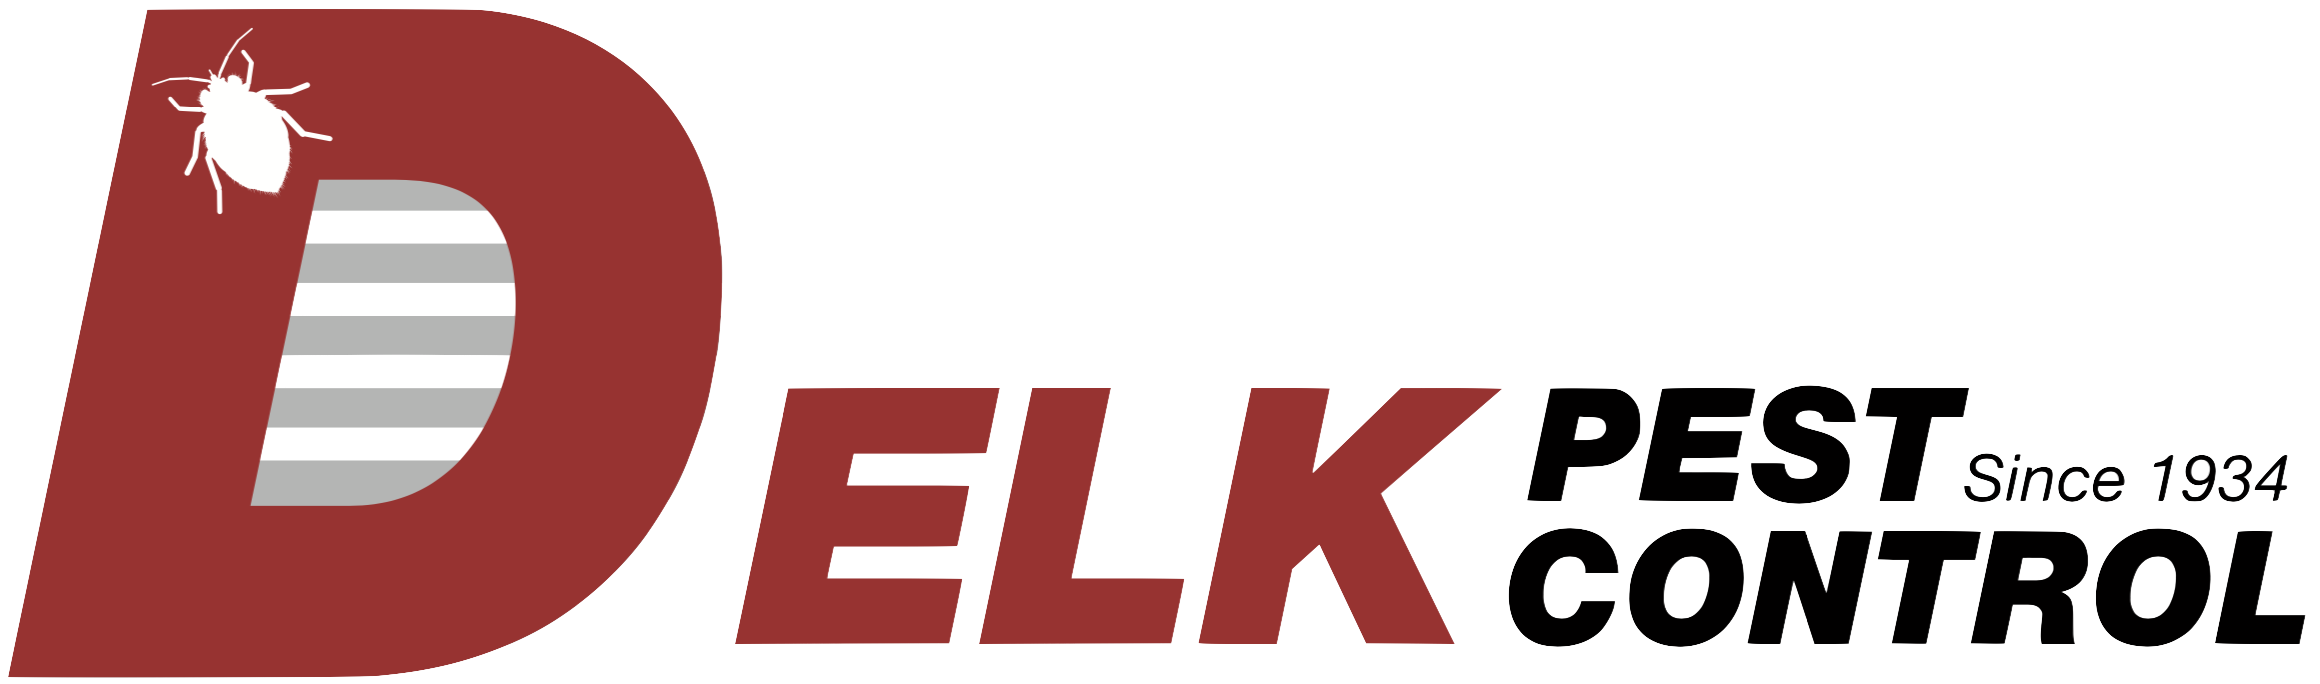 Delk Pest Control-Locally owned since 1934